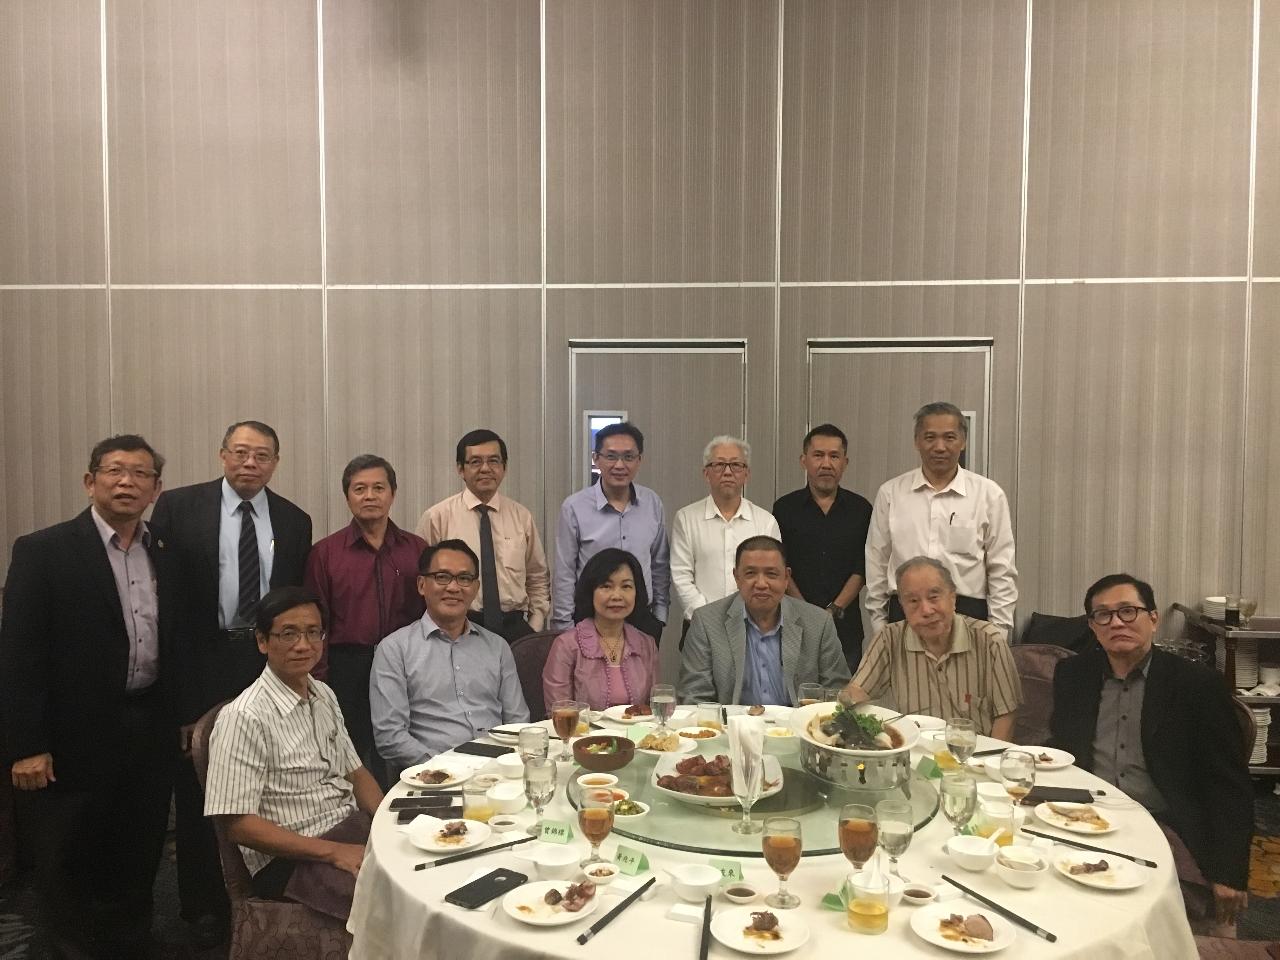 Representative Anne Hung (first row, third from left) takes group photo with VIPs attending Year-End Banquet hosted by The Federation of Alumni Association of Taiwan Universities, Malaysia.

